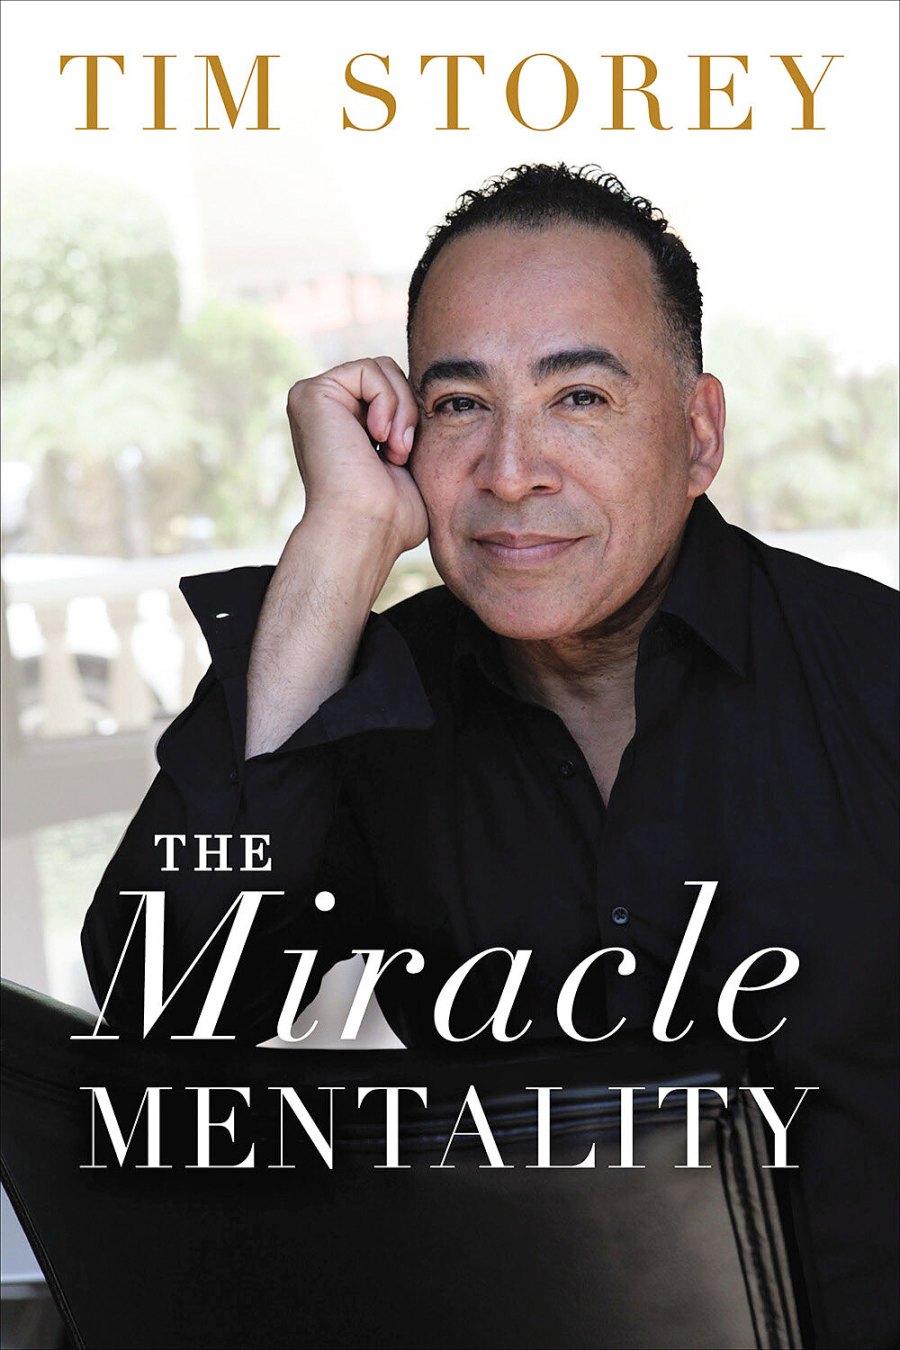 The Miracle Mentality By Tim Storey Us Weekly Buzzzz-o-Meter Issue 9